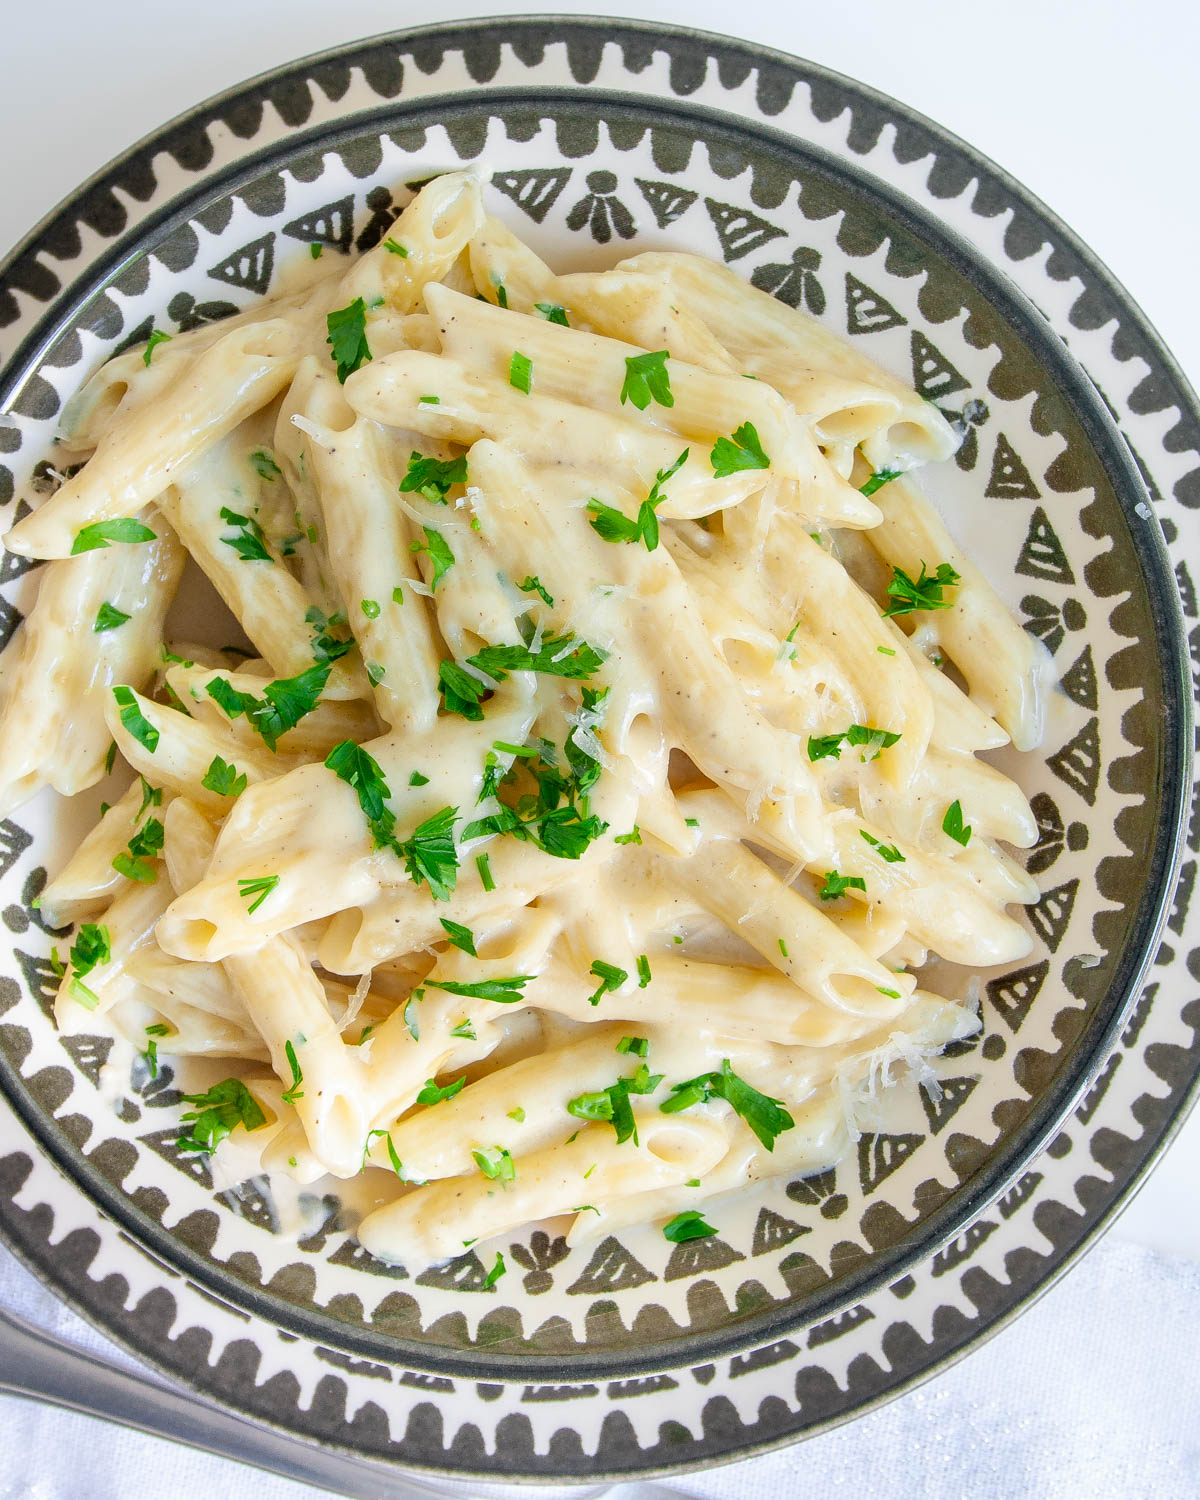 creamy parmesan pasta in a plate garnished with parsley